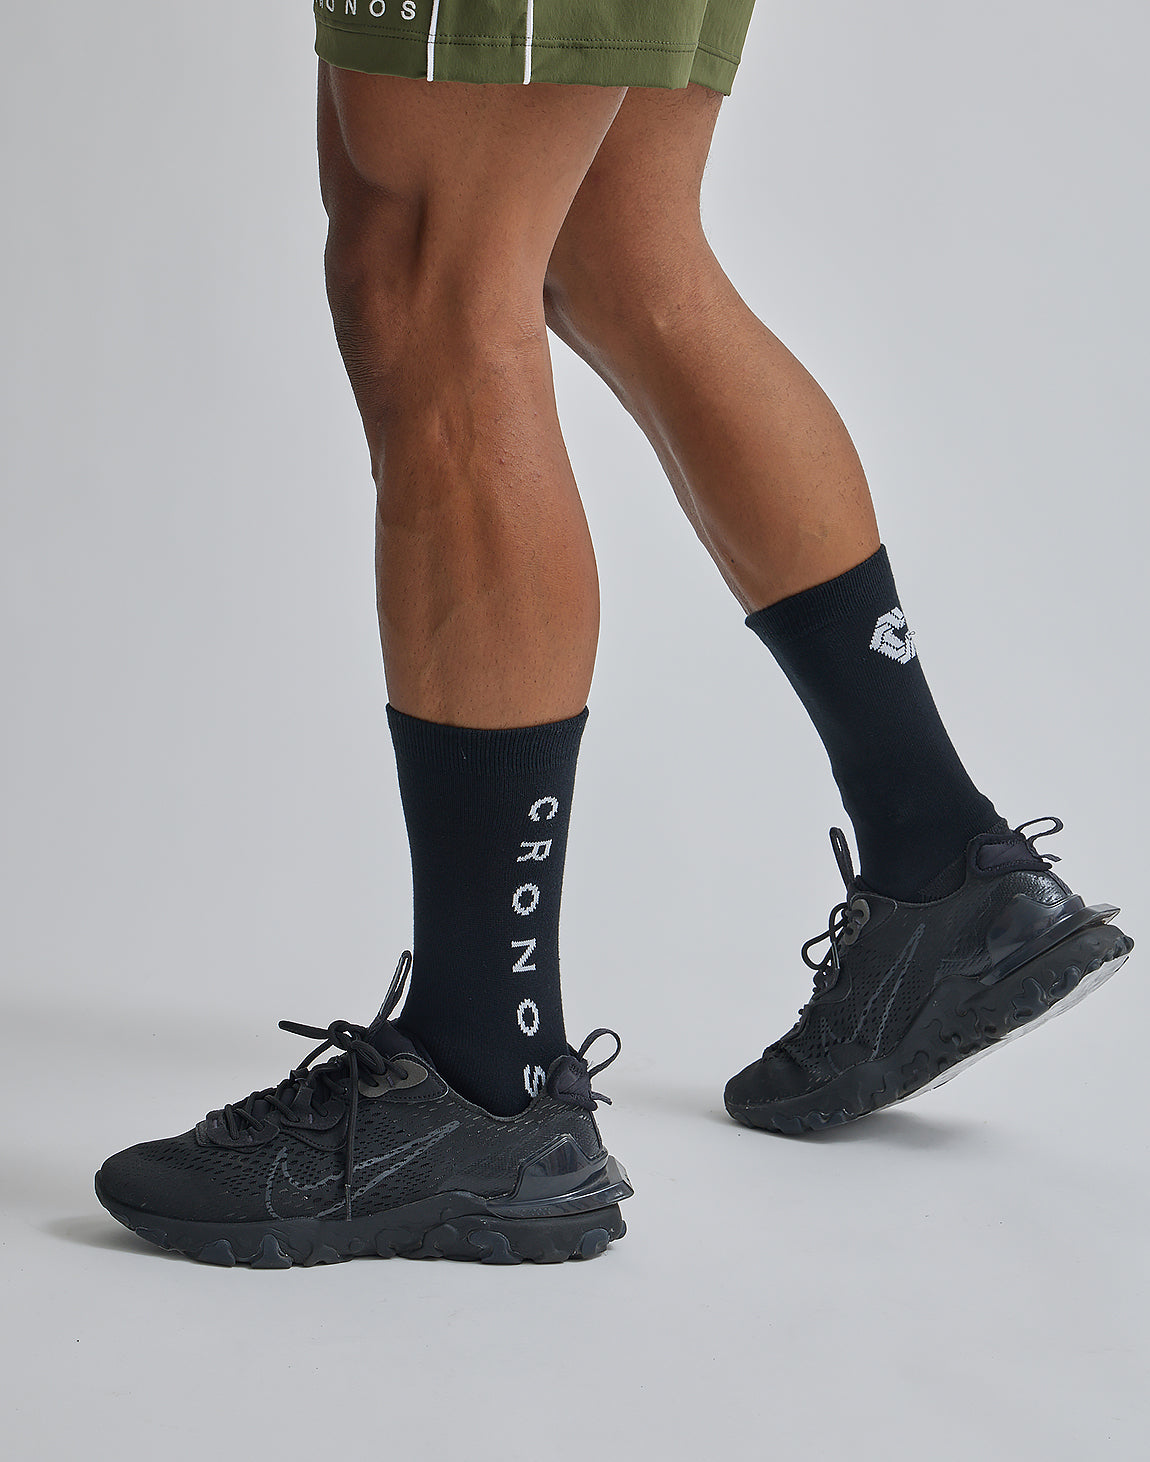 CRONOS ACTIVE SOCKS – クロノス CRONOS Official Store